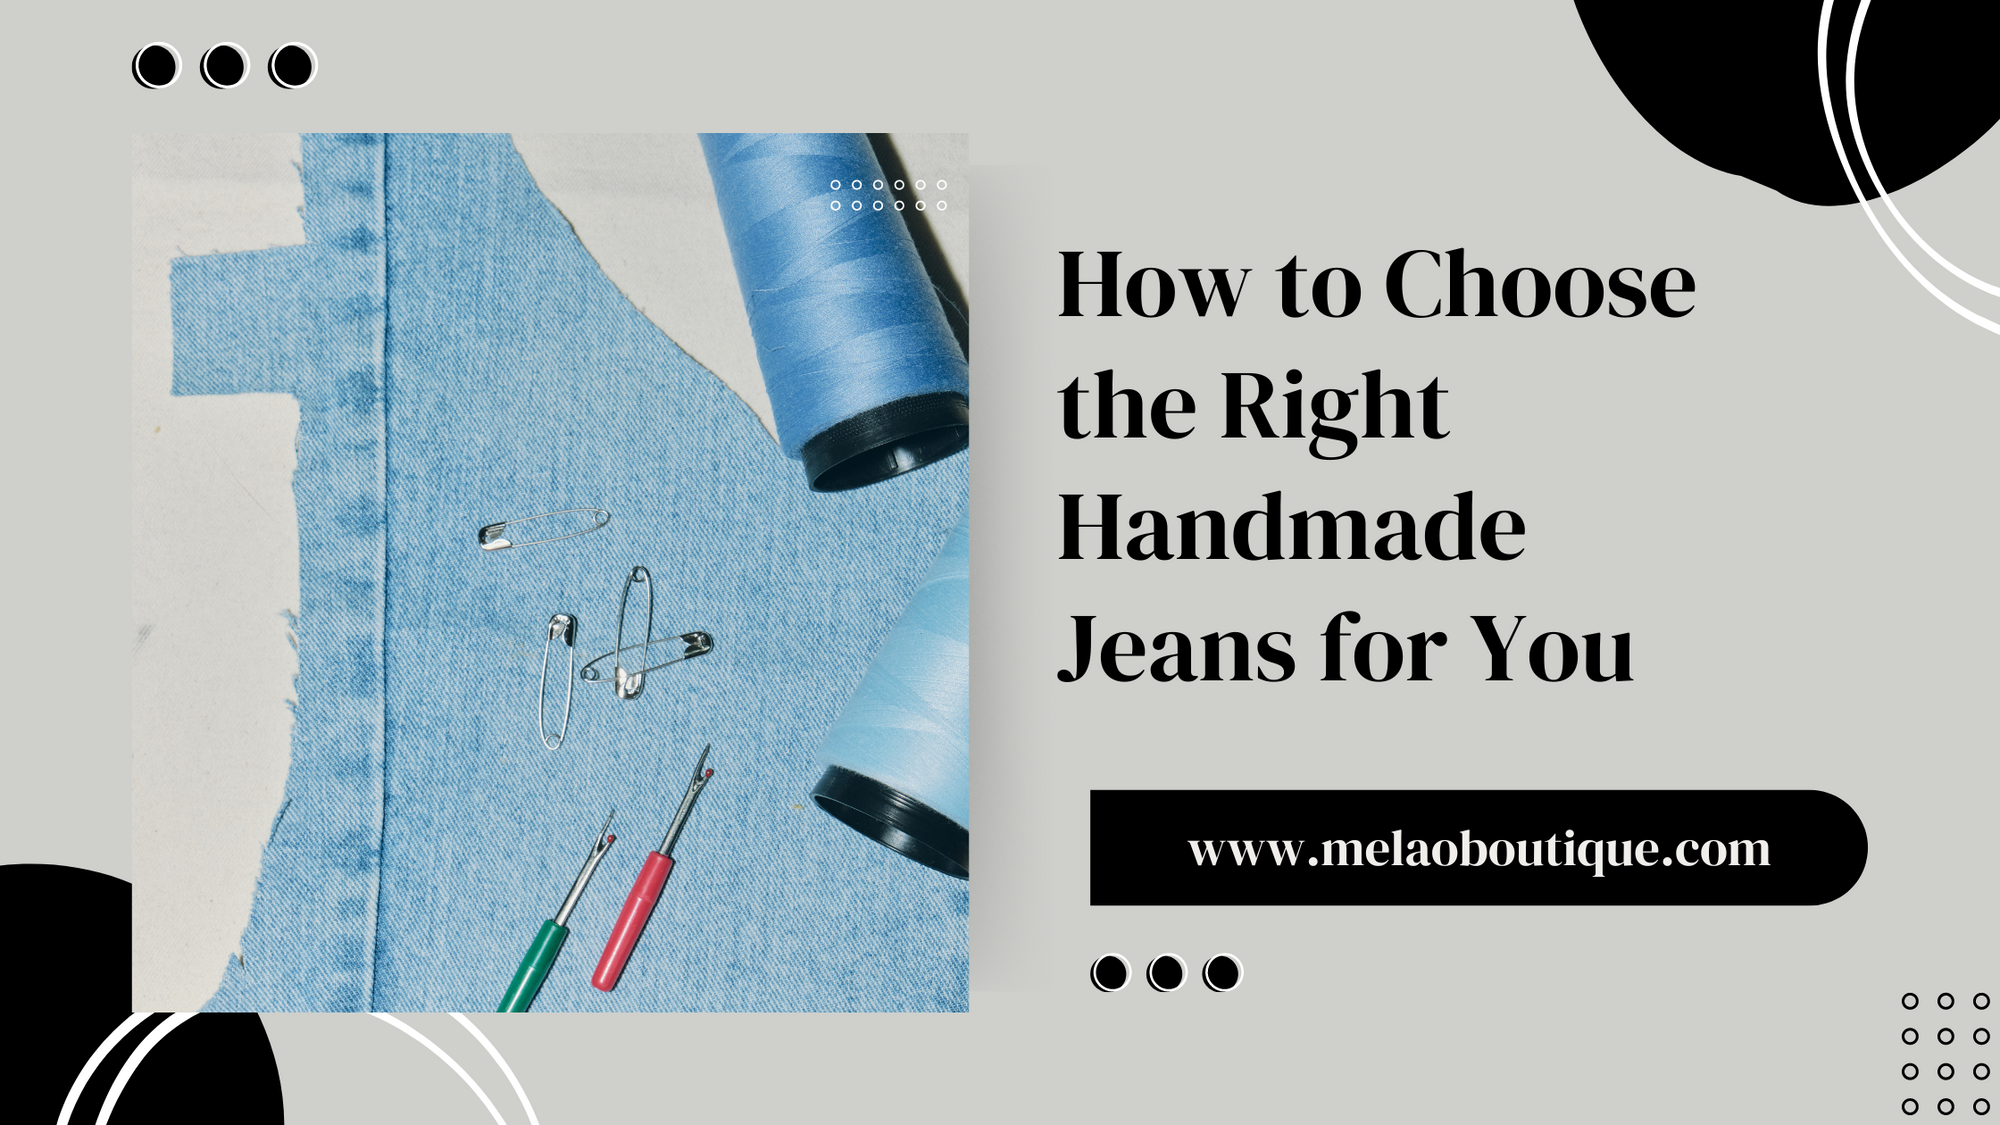 How to Choose the Right Handmade Jeans for You